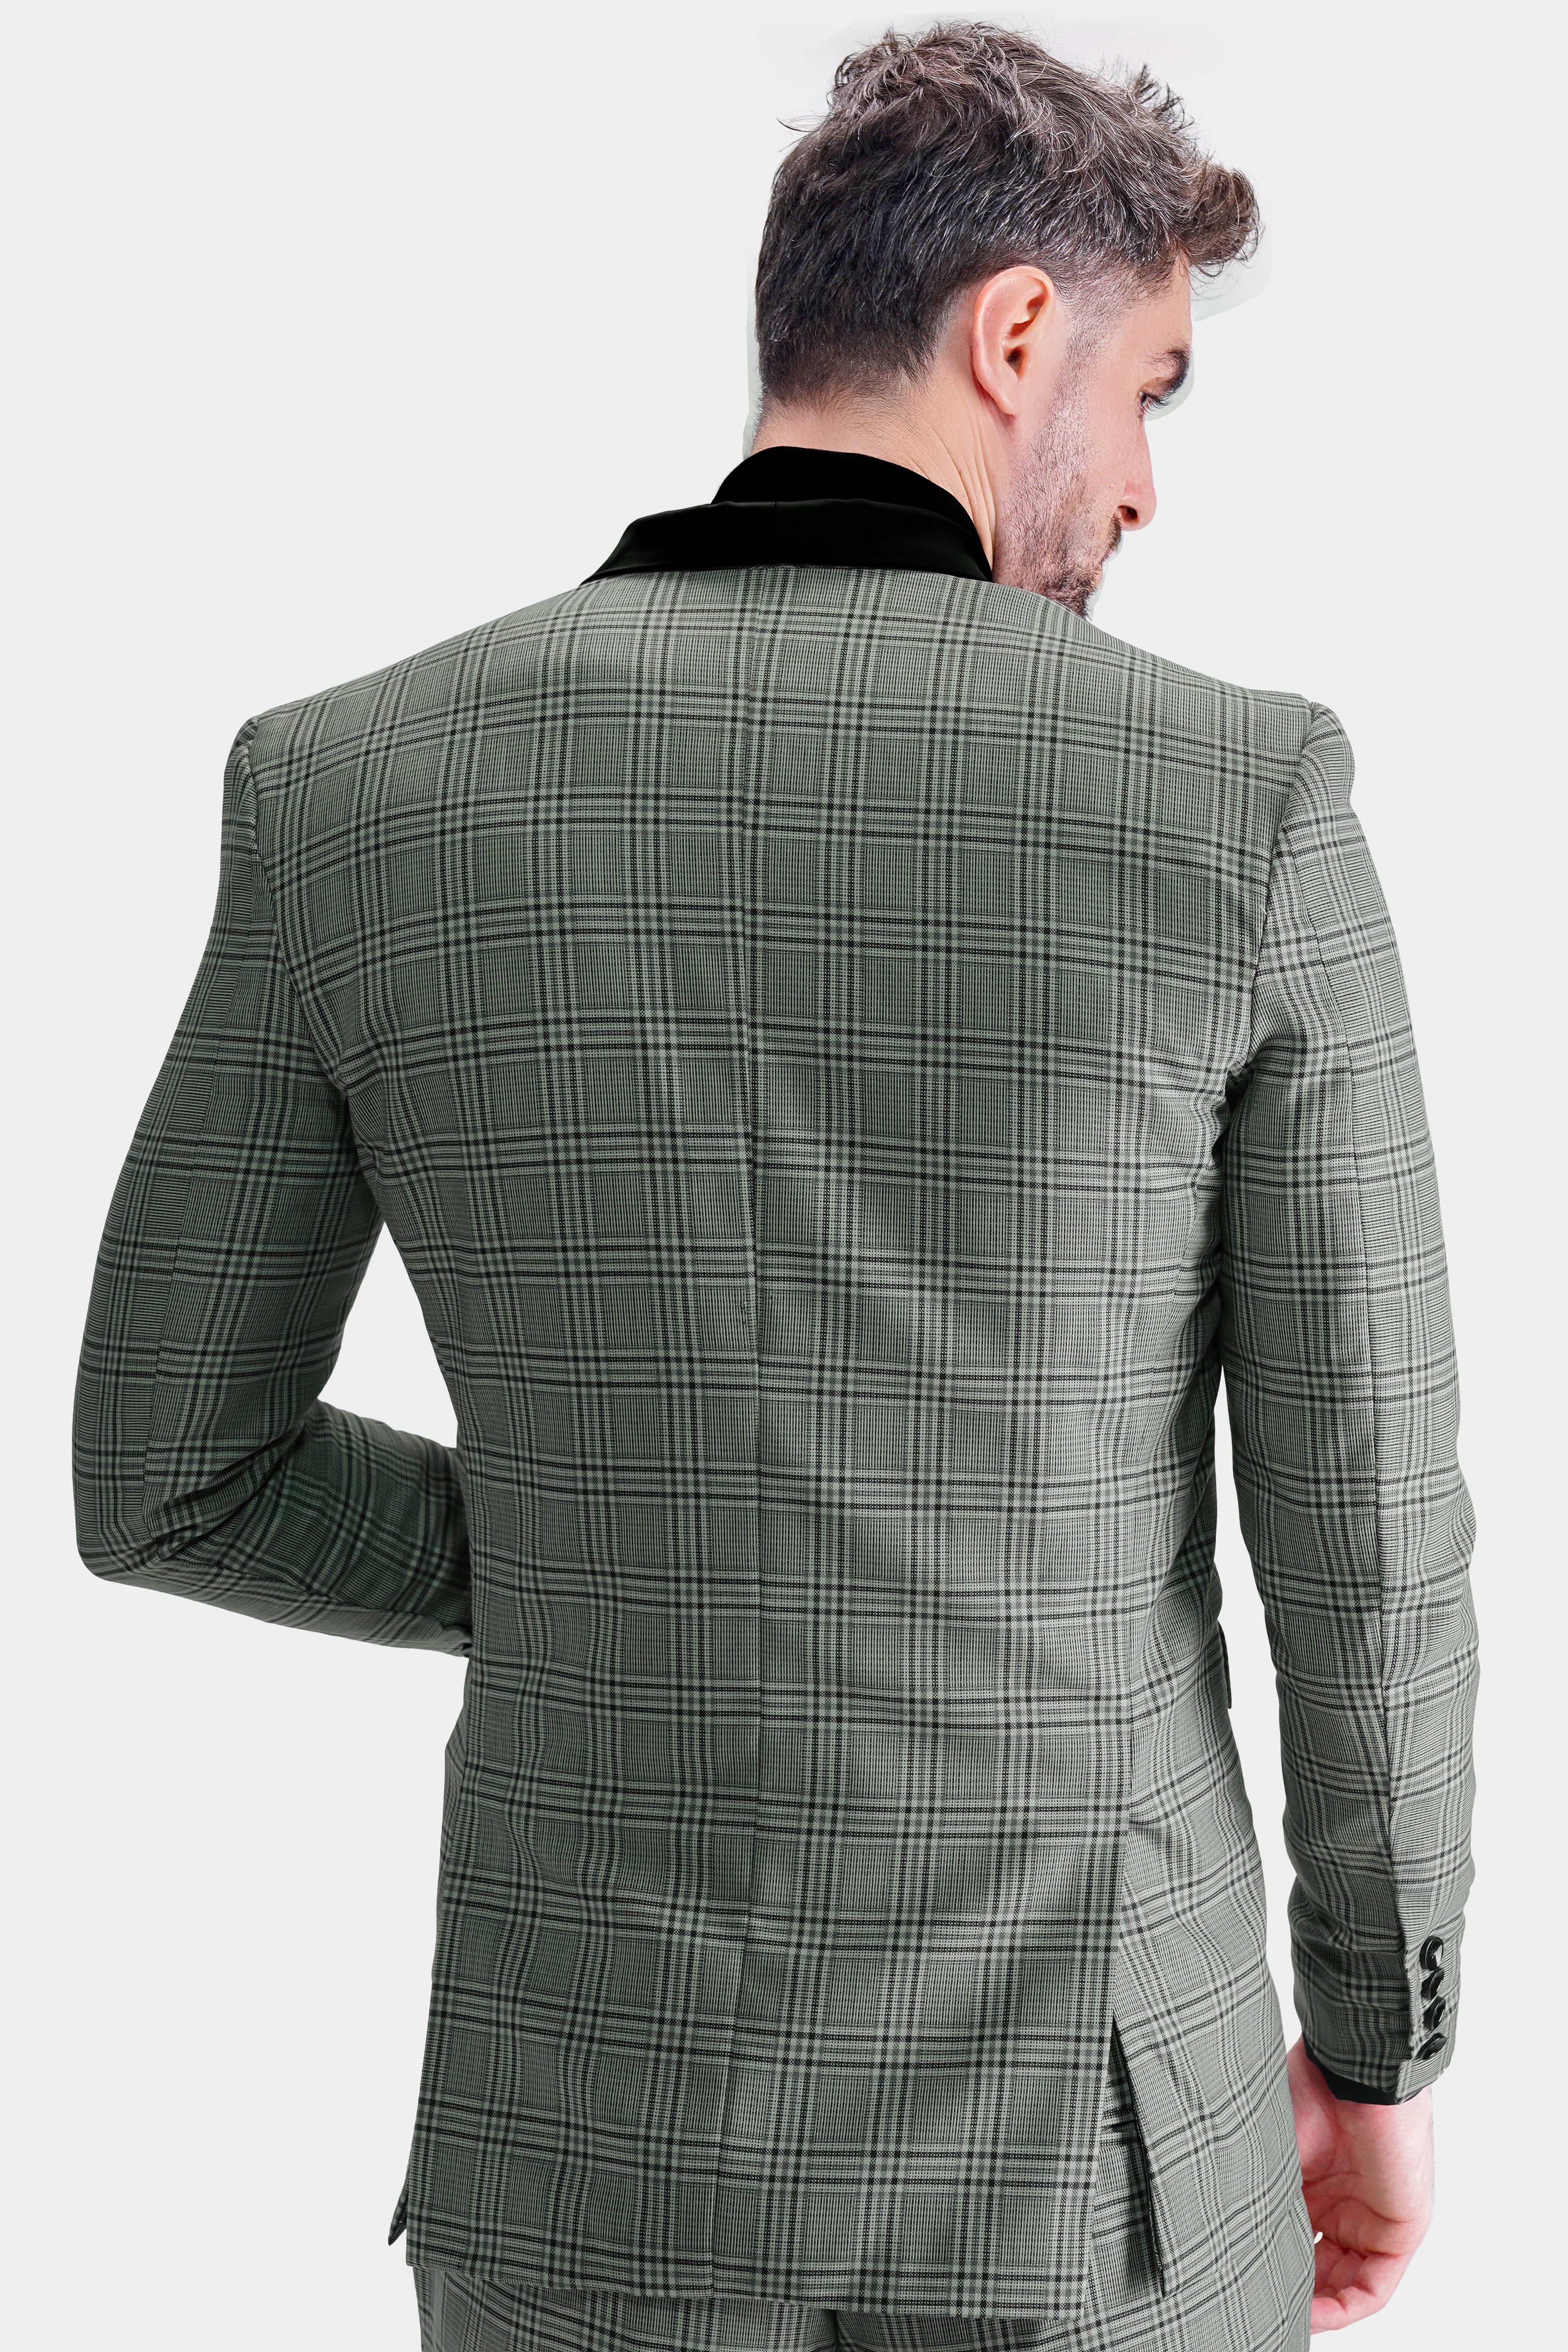 Flint Gray Plaid Wool Rich Double Breasted Designer Blazer BL2754-DB4-BKL-D141-36, BL2754-DB4-BKL-D141-38, BL2754-DB4-BKL-D141-40, BL2754-DB4-BKL-D141-42, BL2754-DB4-BKL-D141-44, BL2754-DB4-BKL-D141-46, BL2754-DB4-BKL-D141-48, BL2754-DB4-BKL-D141-50, BL2754-DB4-BKL-D141-52, BL2754-DB4-BKL-D141-54, BL2754-DB4-BKL-D141-56, BL2754-DB4-BKL-D141-58, BL2754-DB4-BKL-D141-60